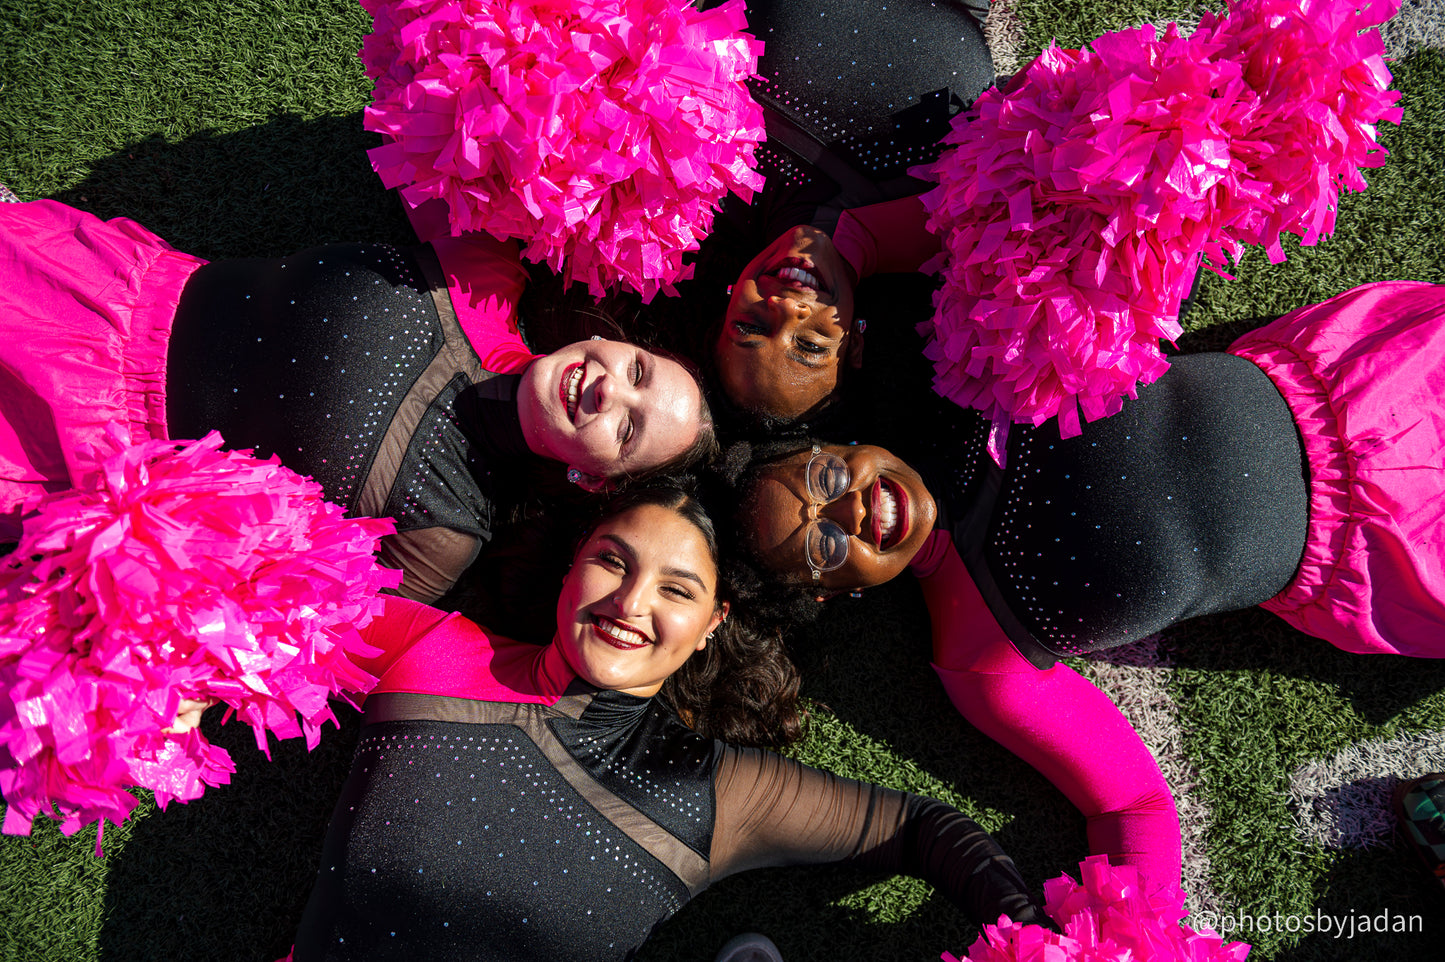 Members of the cheer team pose with pink pompoms on the football field